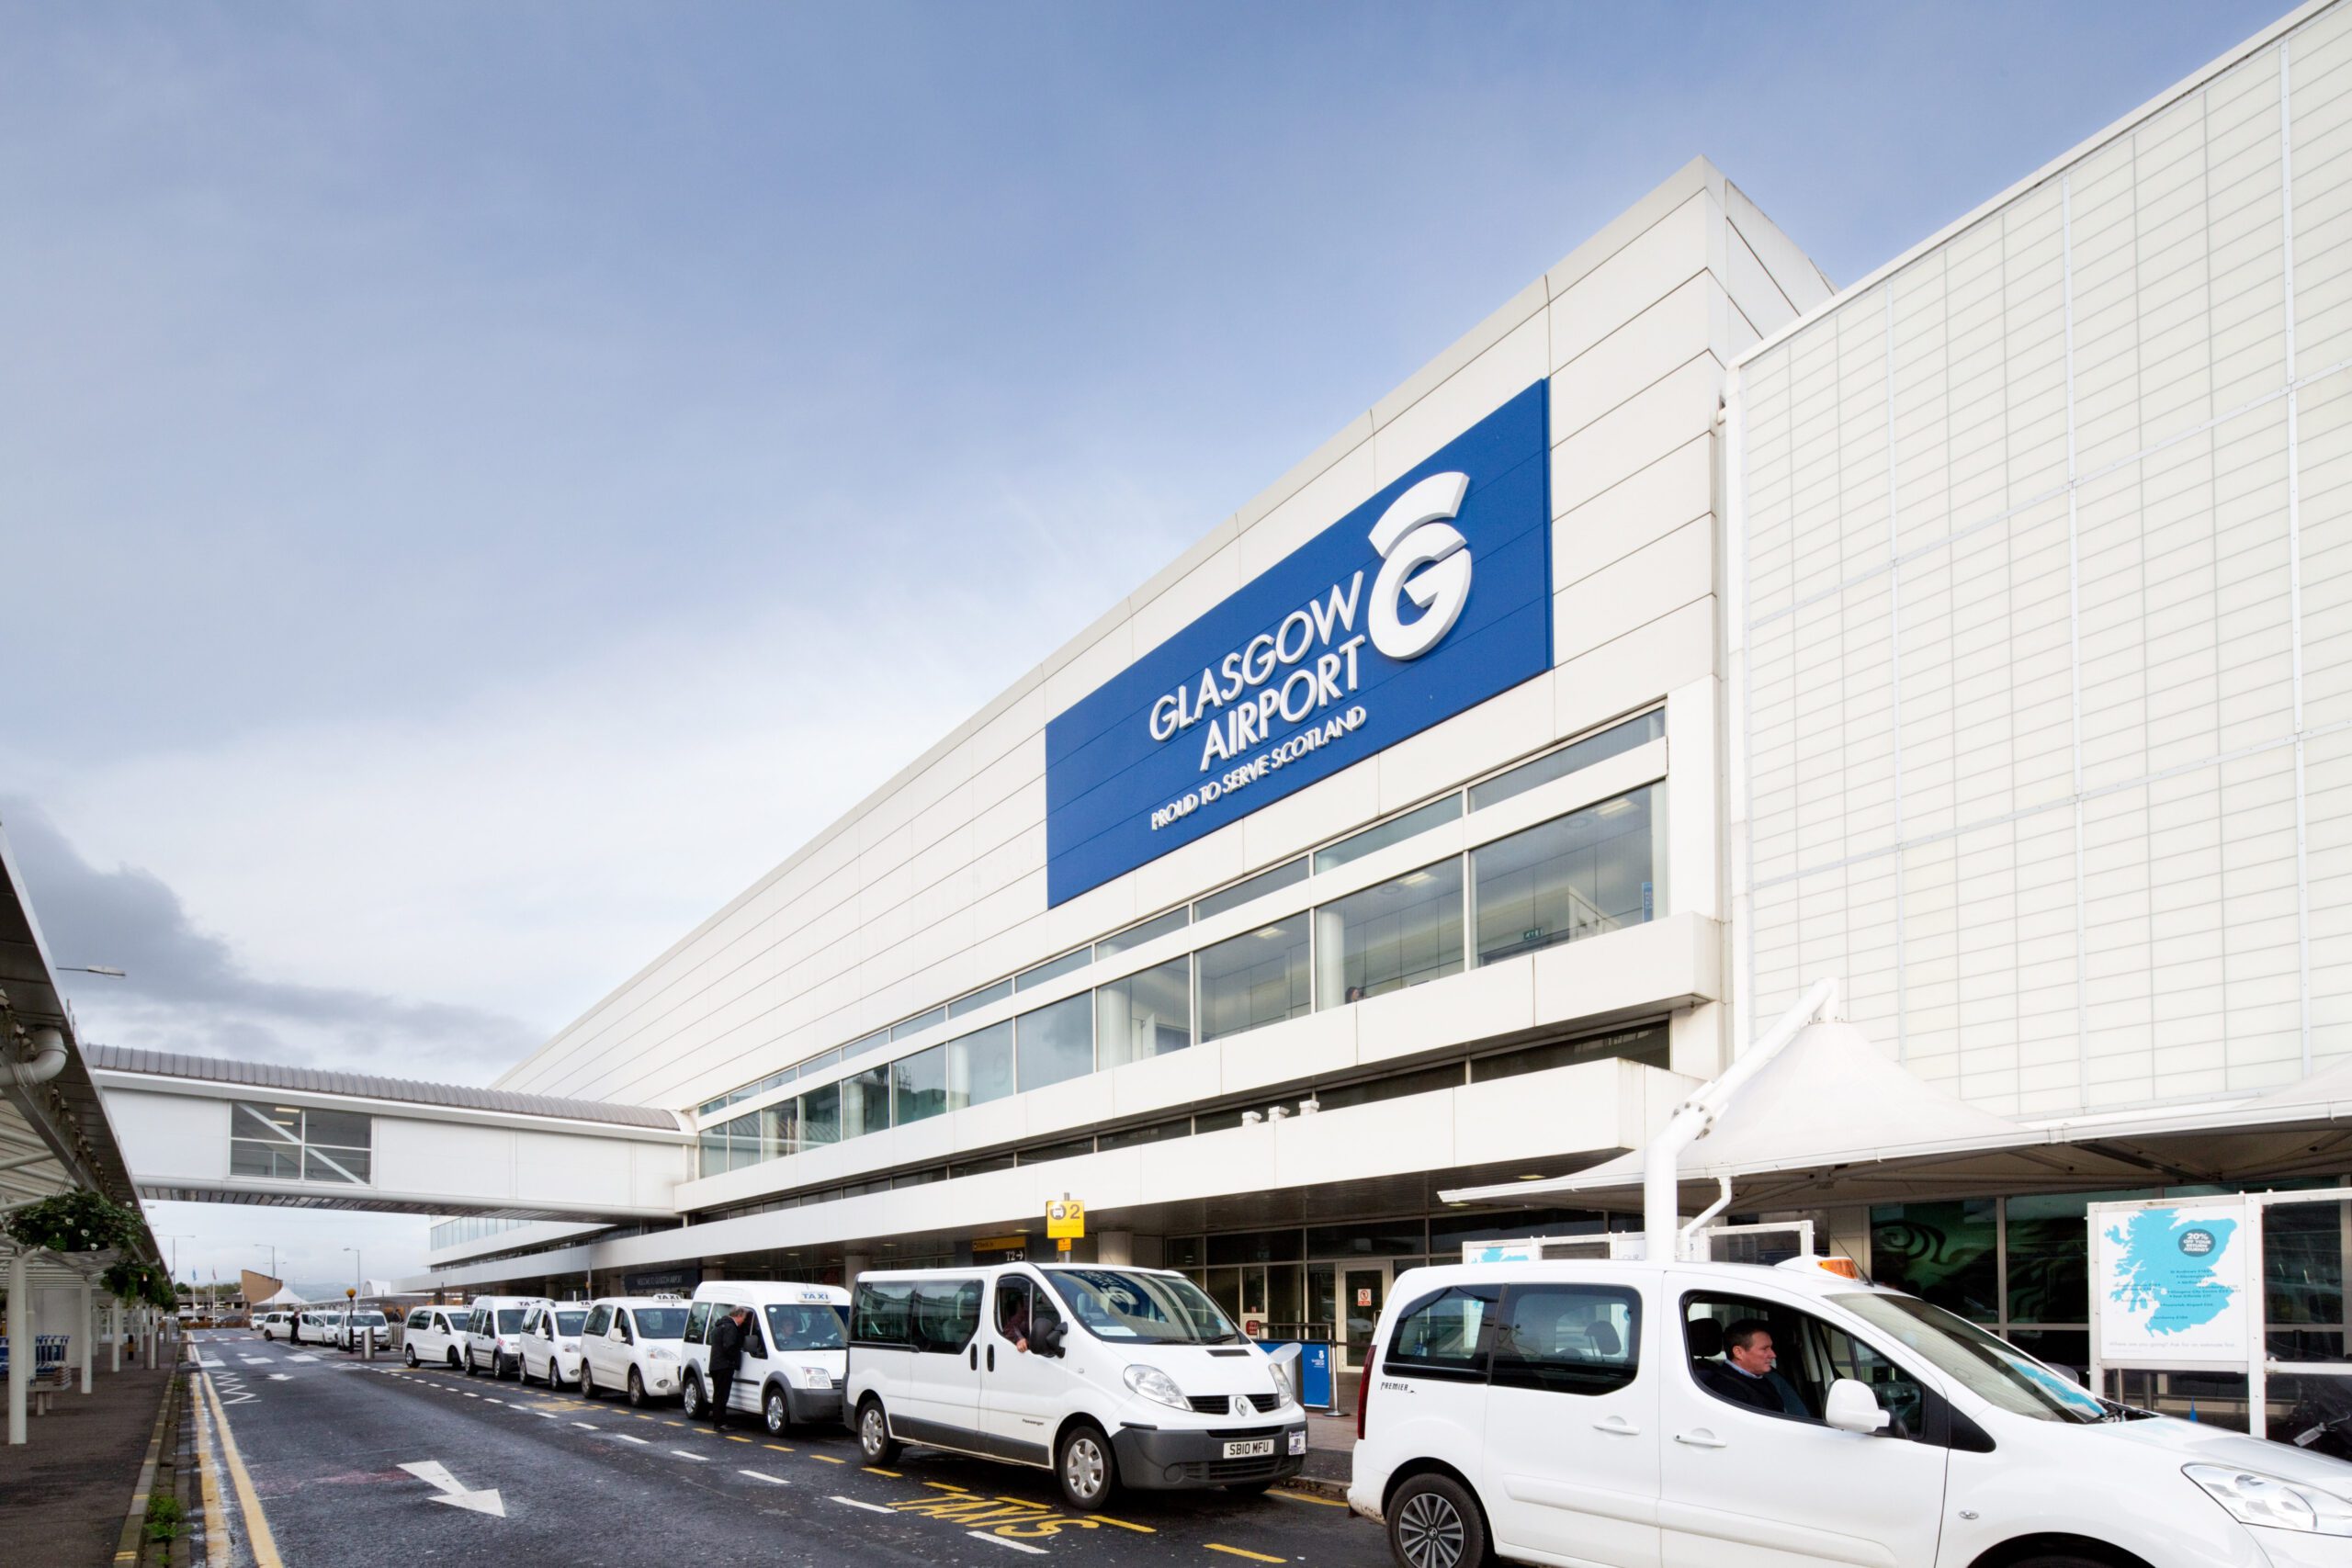 Glasgow Airport exterior scaled